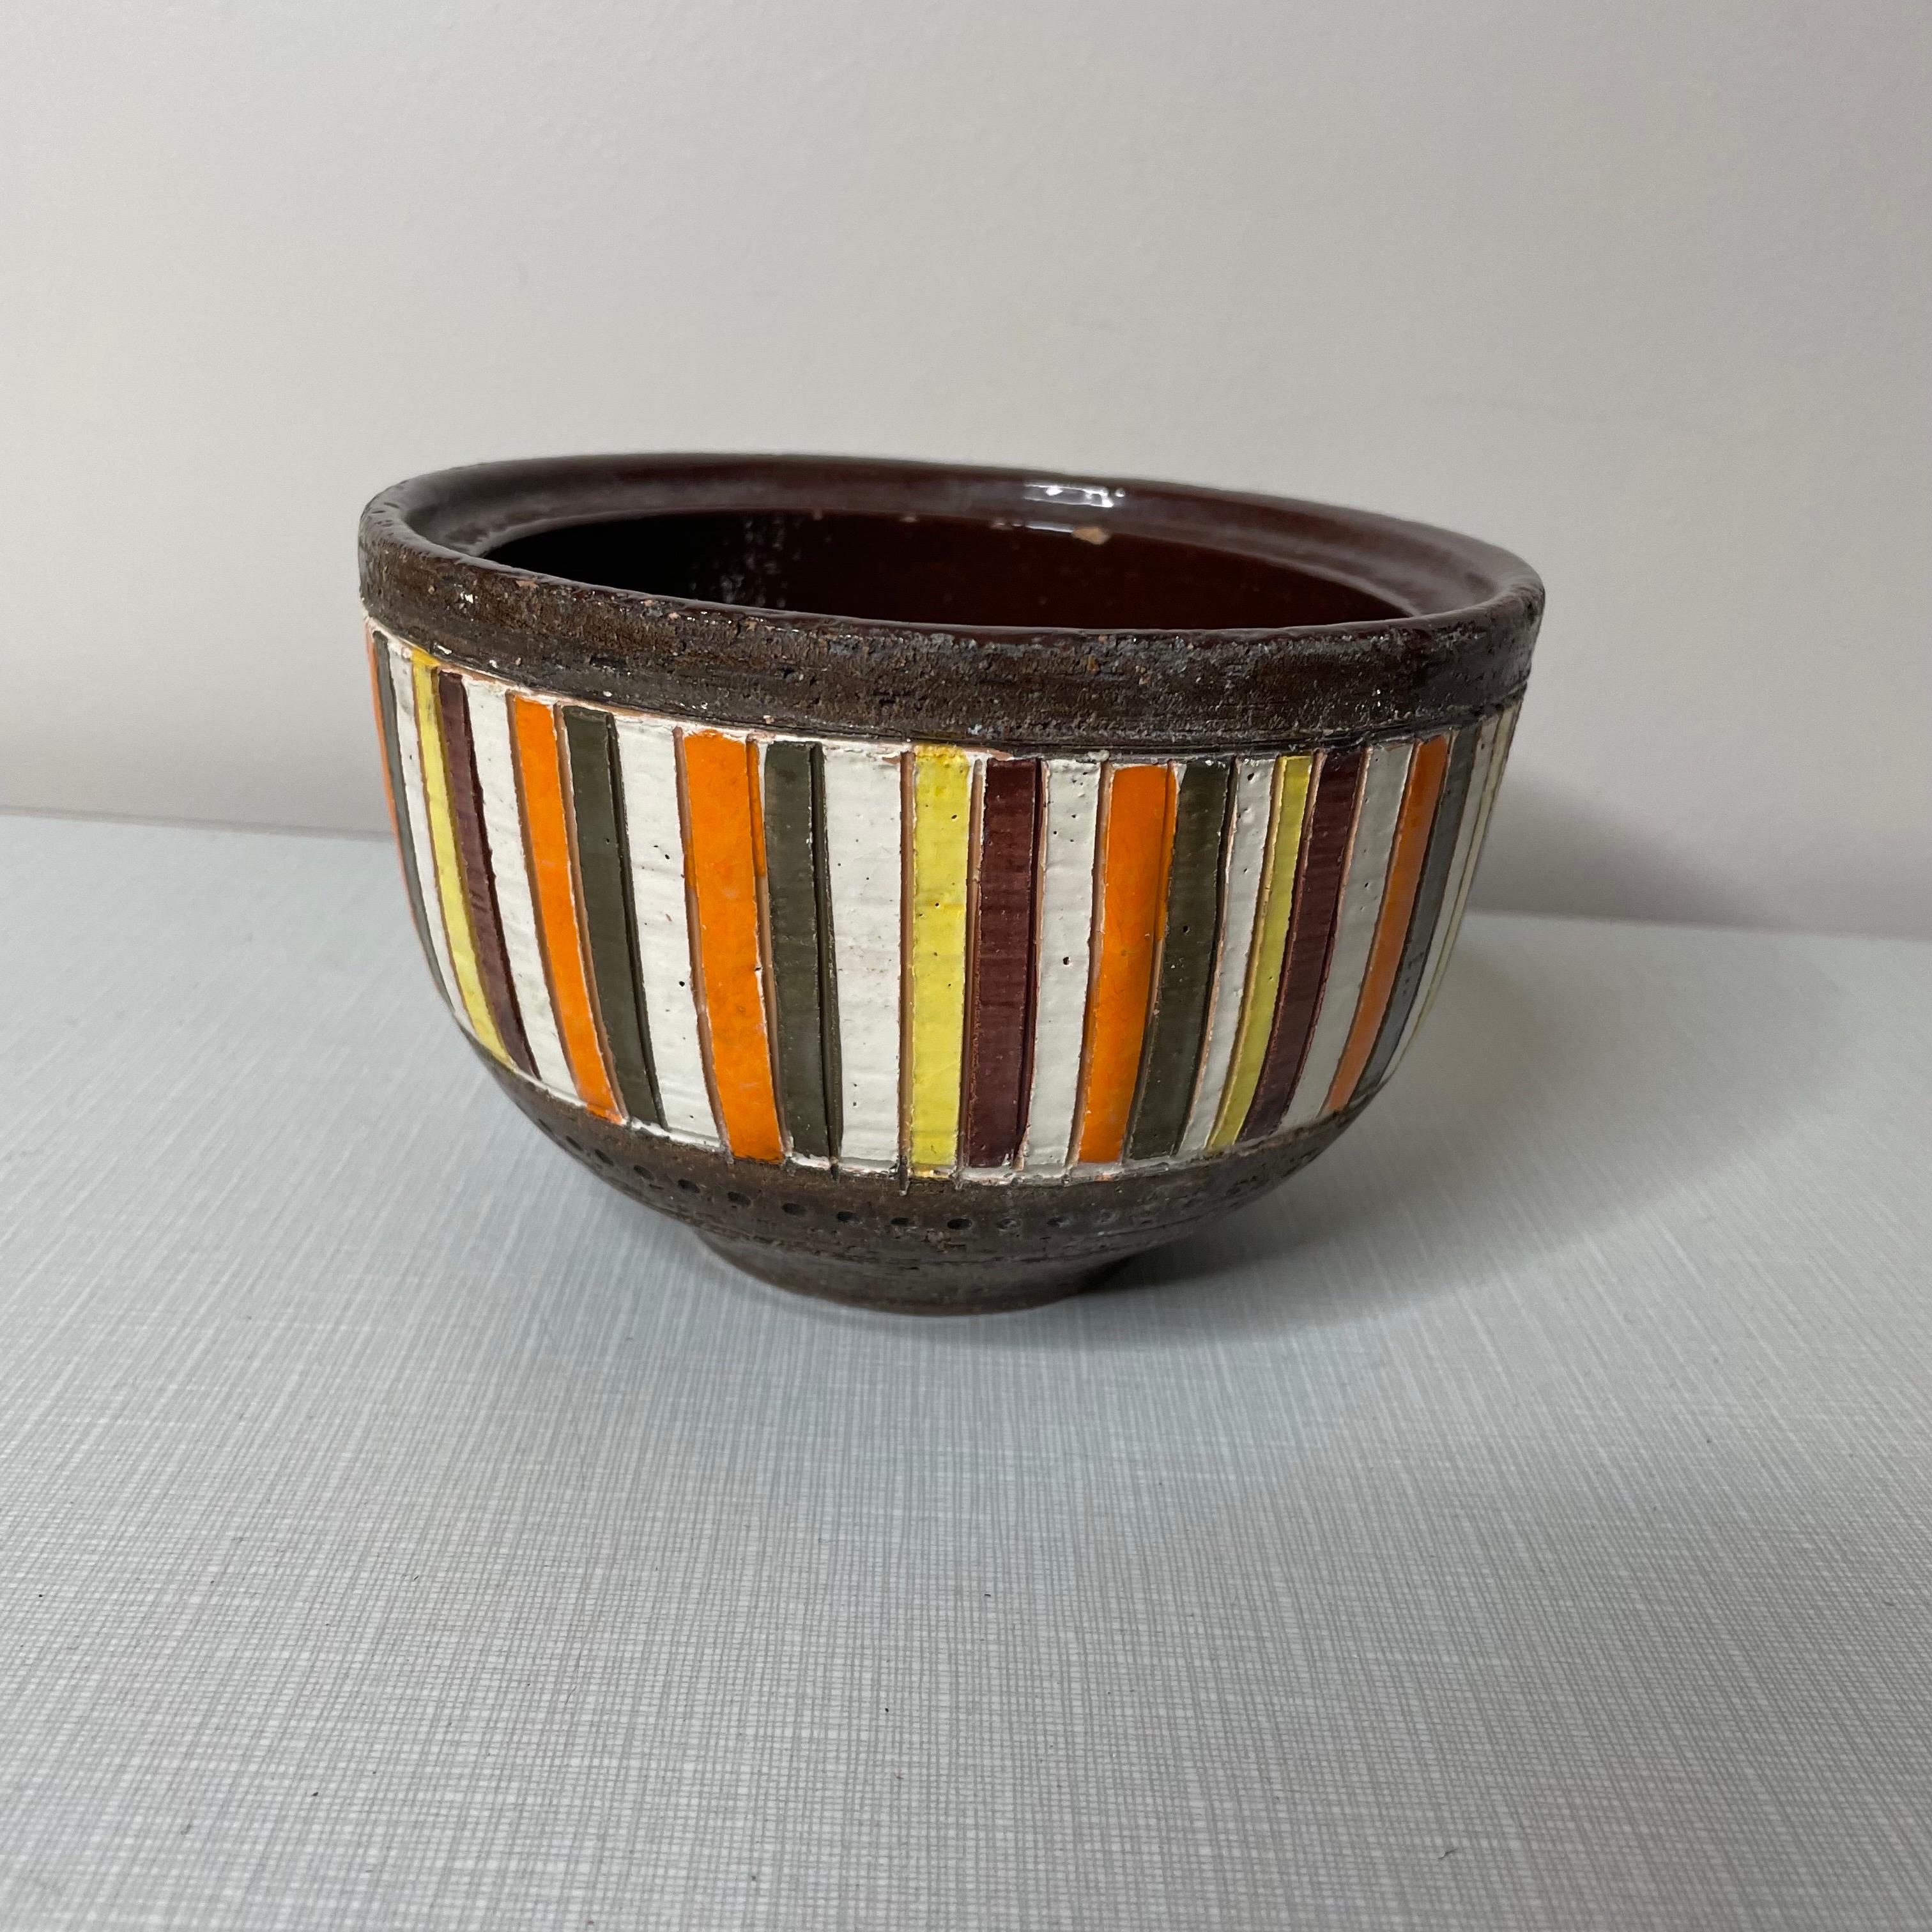 Italian-made bowl, or cachepot, or catchall. Made from ceramic with a band of brown glaze on the top and base. Vertical stripes in orange, yellow, white, and a sort of olive-brown color. Signed on the base, also retains the original Rosenthal-Netter